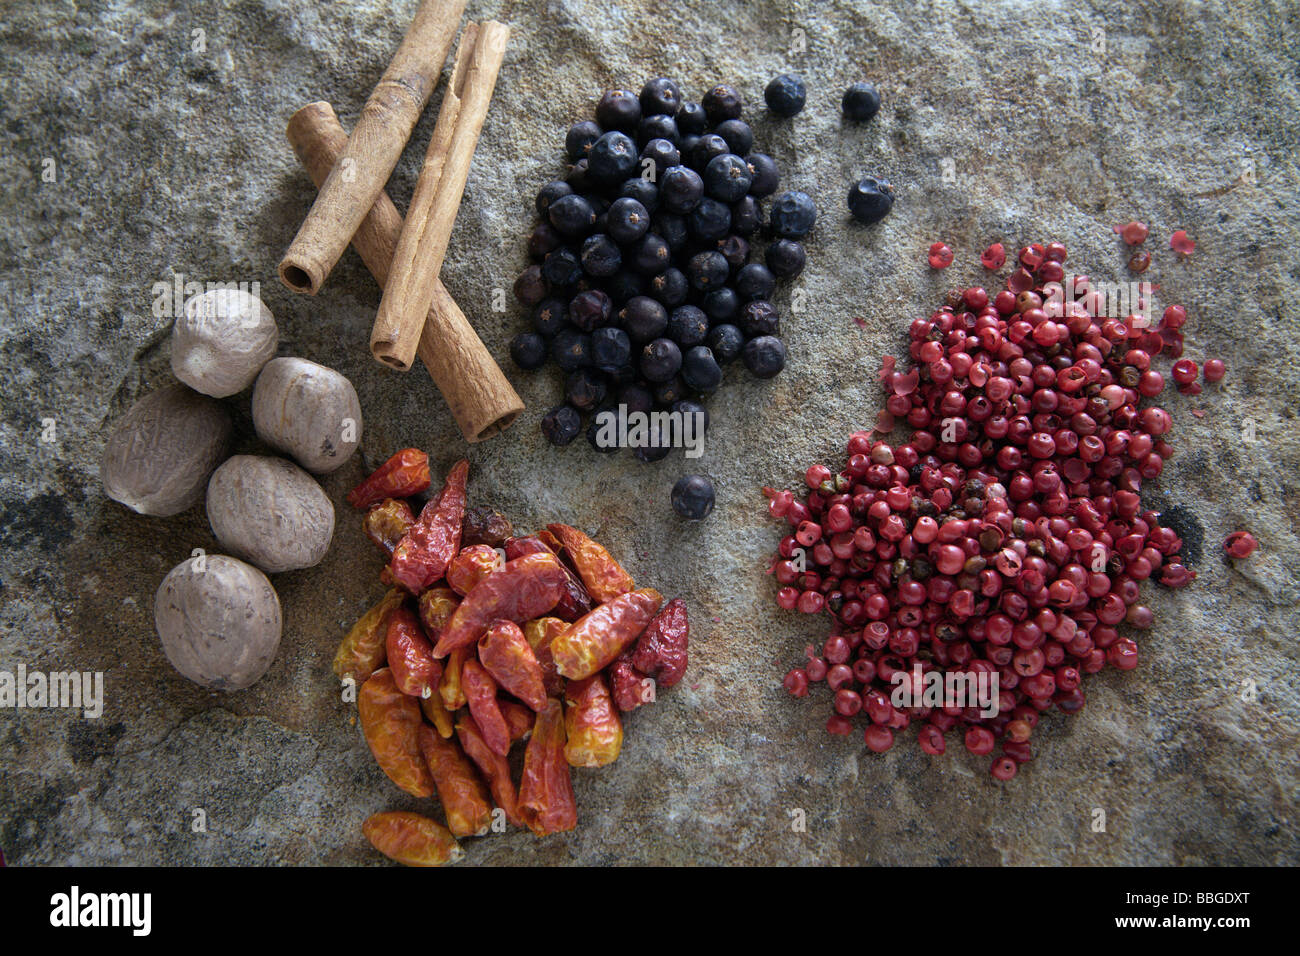 Different spices on a stone slab, juniper, chili peppers, red pepper,  nutmeg, cinnamon sticks Stock Photo - Alamy